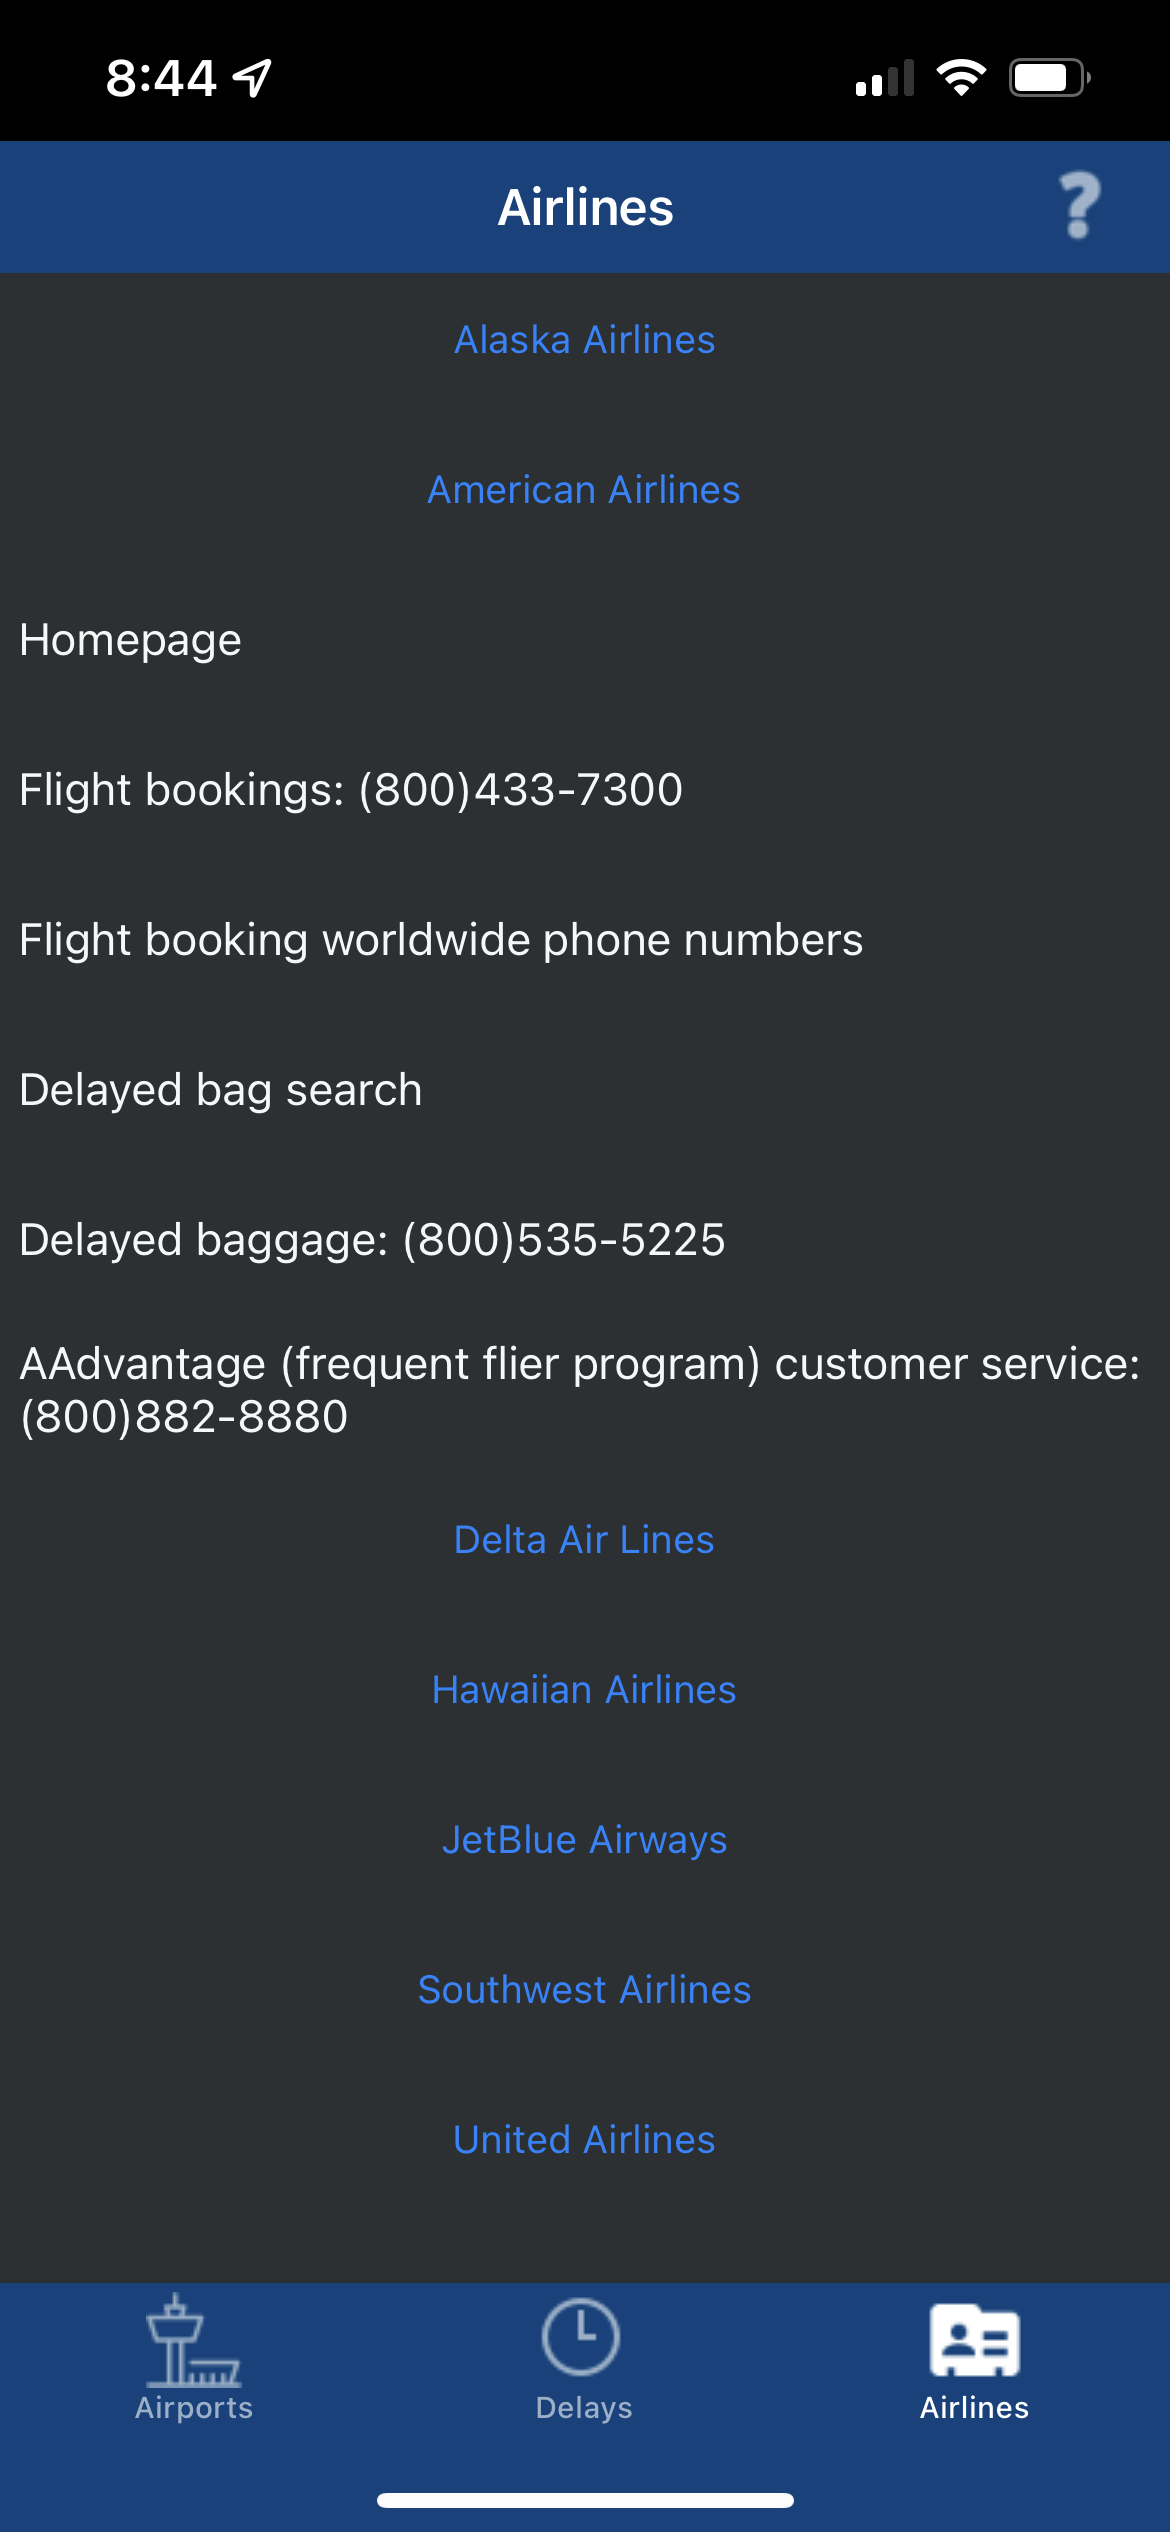 Has contact info for major US airlines!